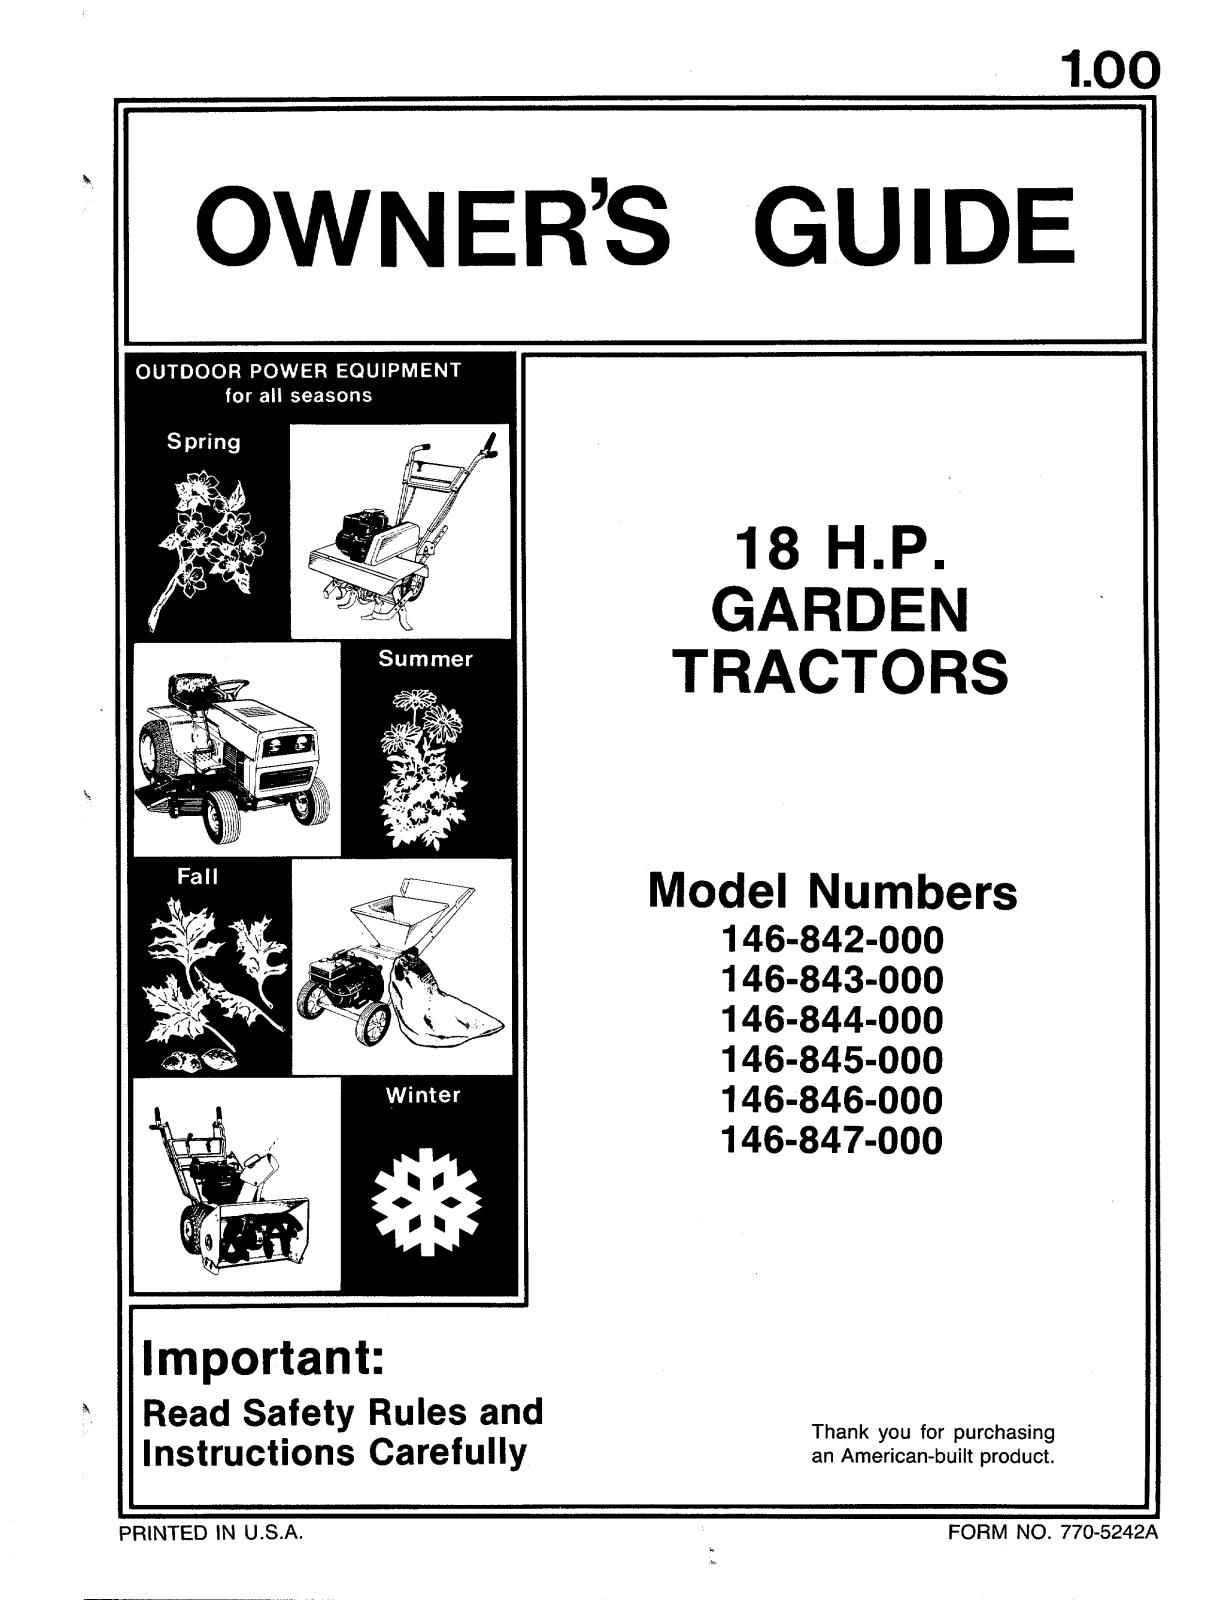 Mtd 146-842-000, 146-843-000, 146-844-000, 146-845-000, 146-846-000 owners guide